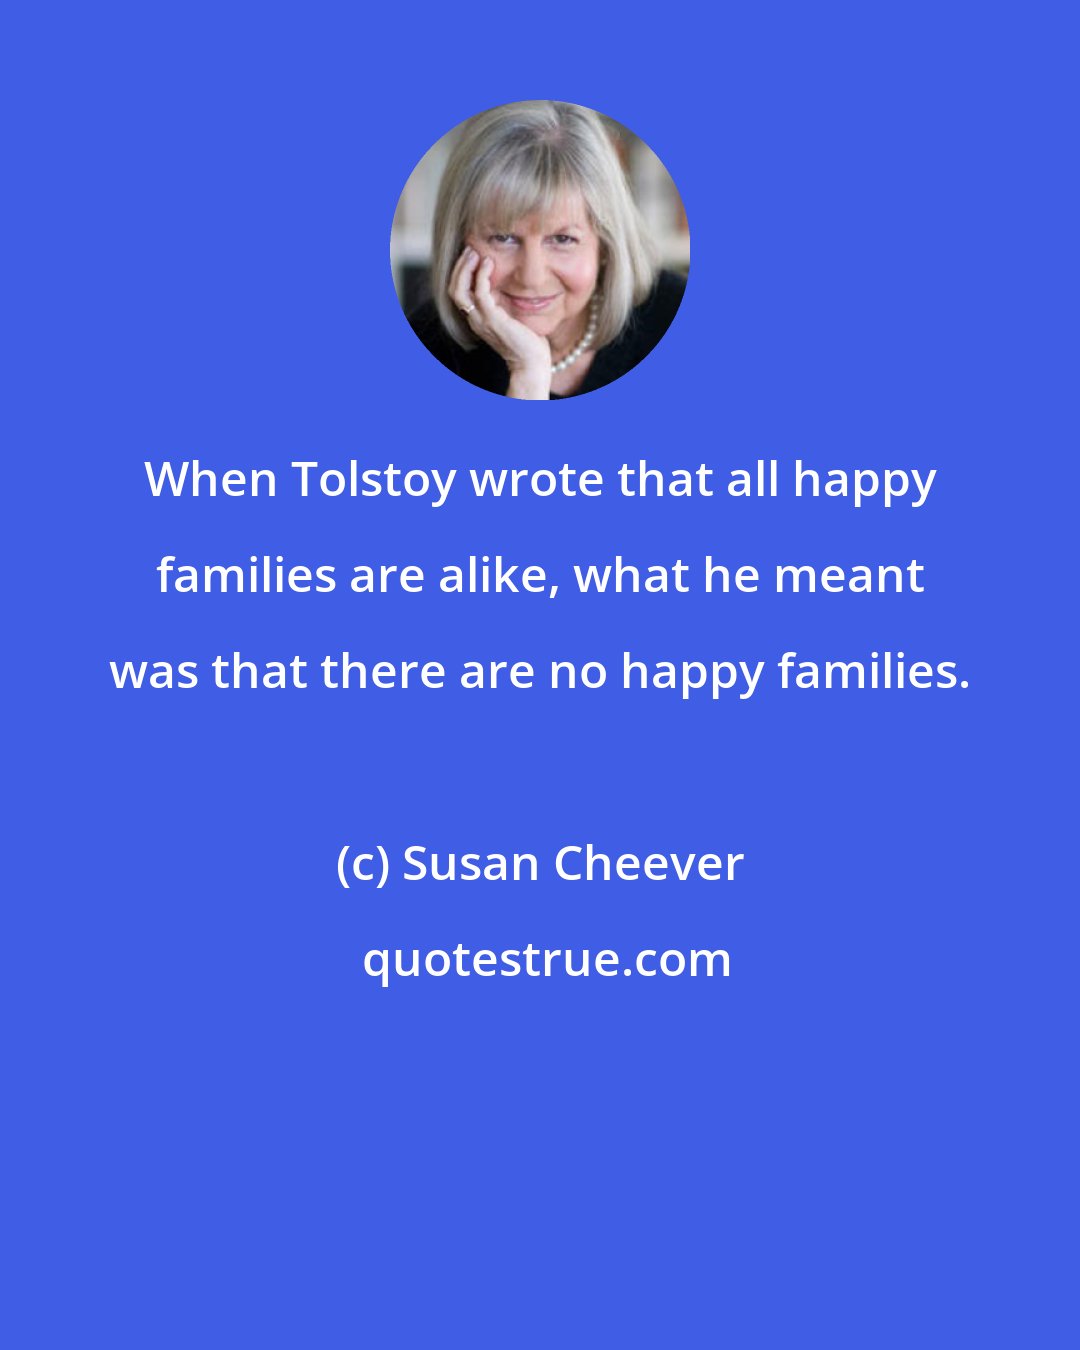 Susan Cheever: When Tolstoy wrote that all happy families are alike, what he meant was that there are no happy families.